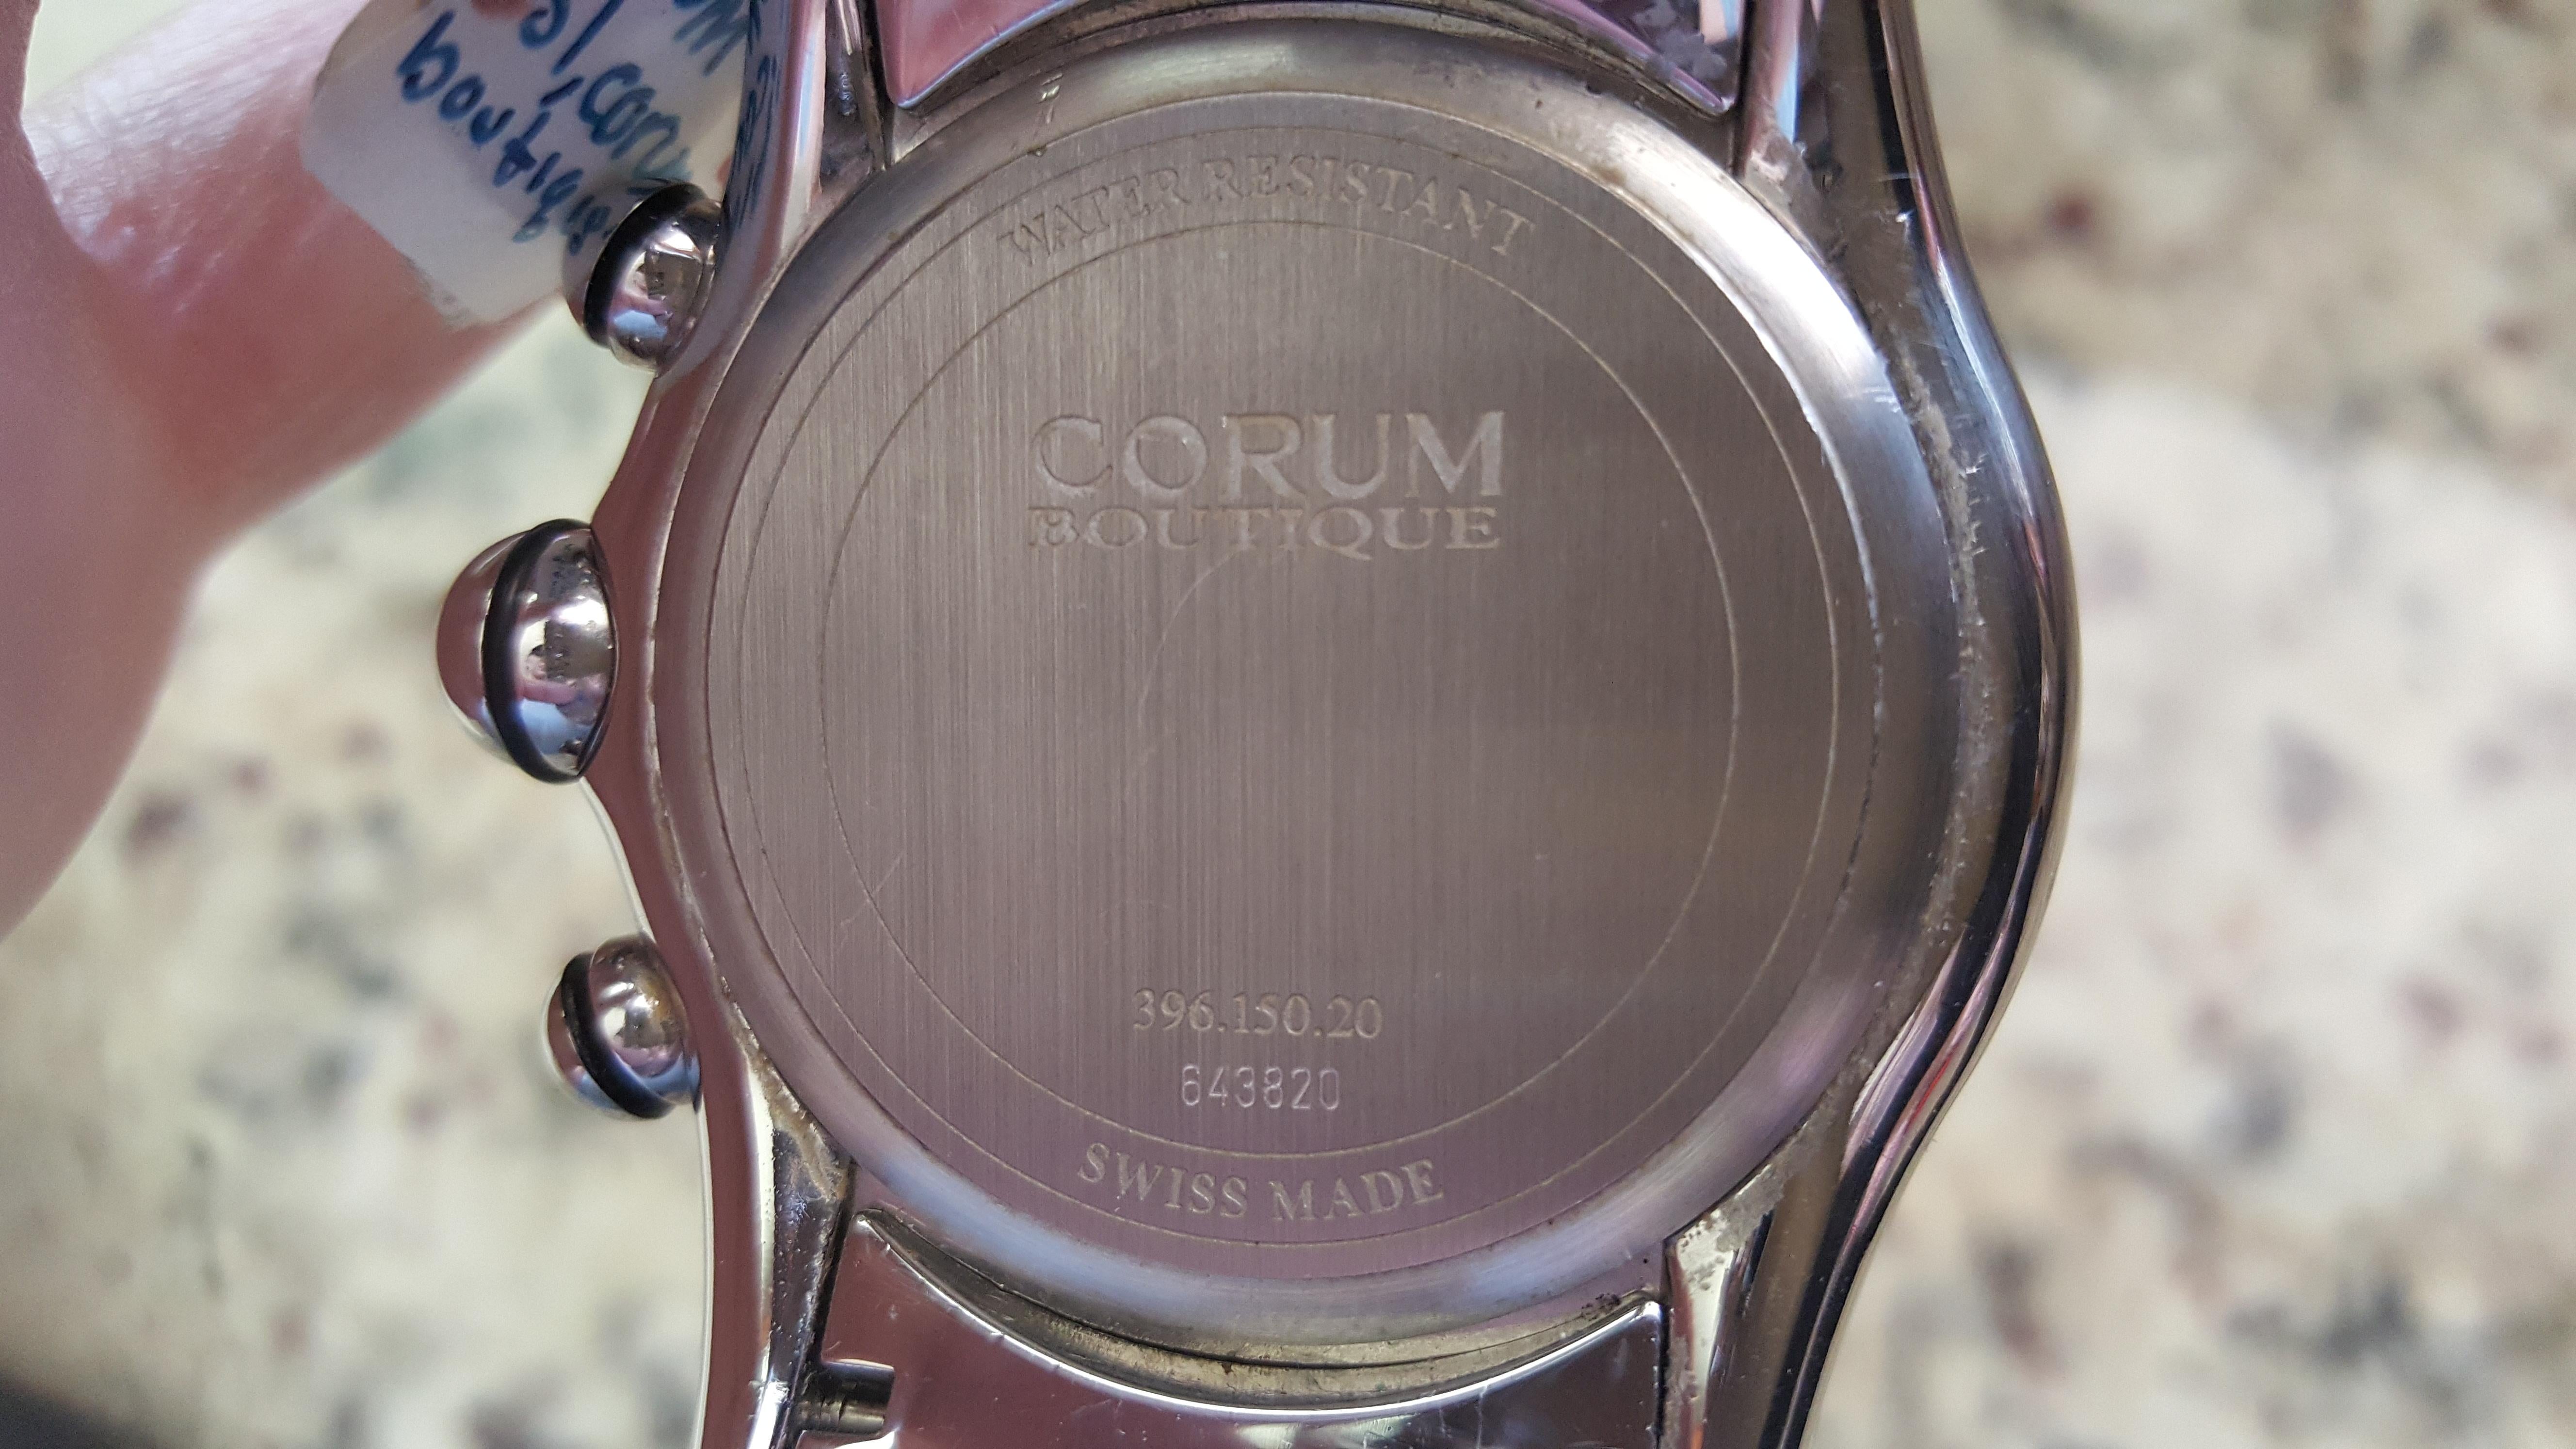 Corum Boutique Chronograph Bubble Stainless Steel Watch White, Model 390.150.20 1